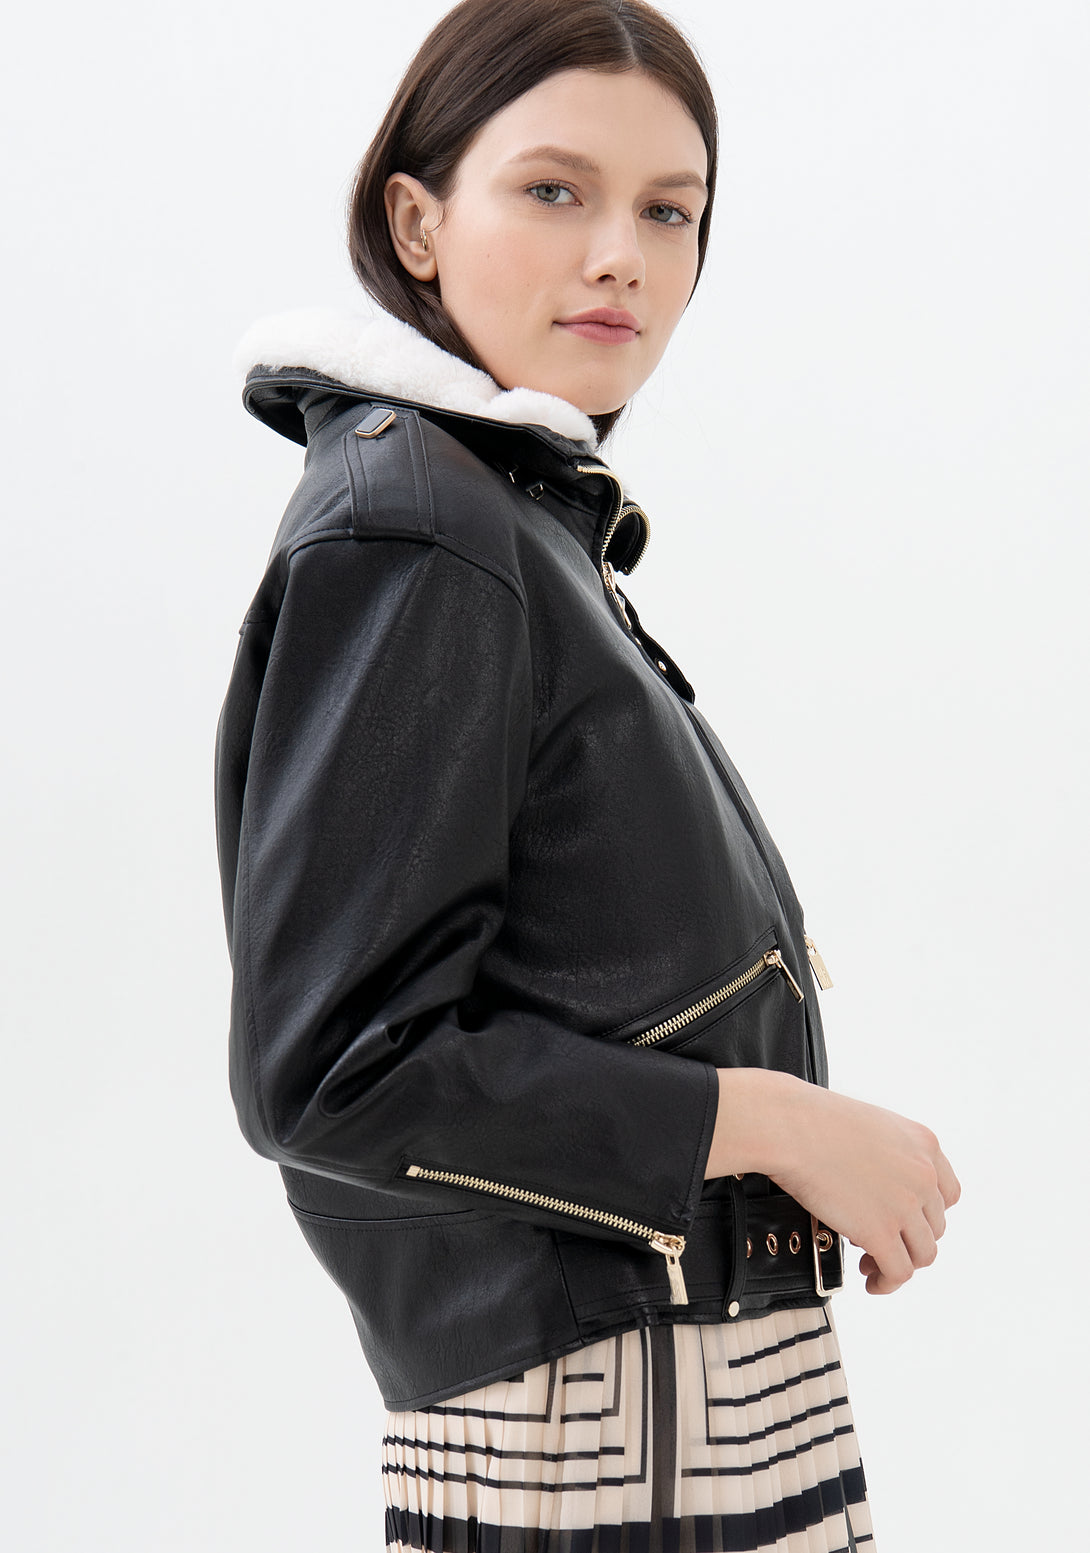 Aviator style jacket regular fit made in eco leather